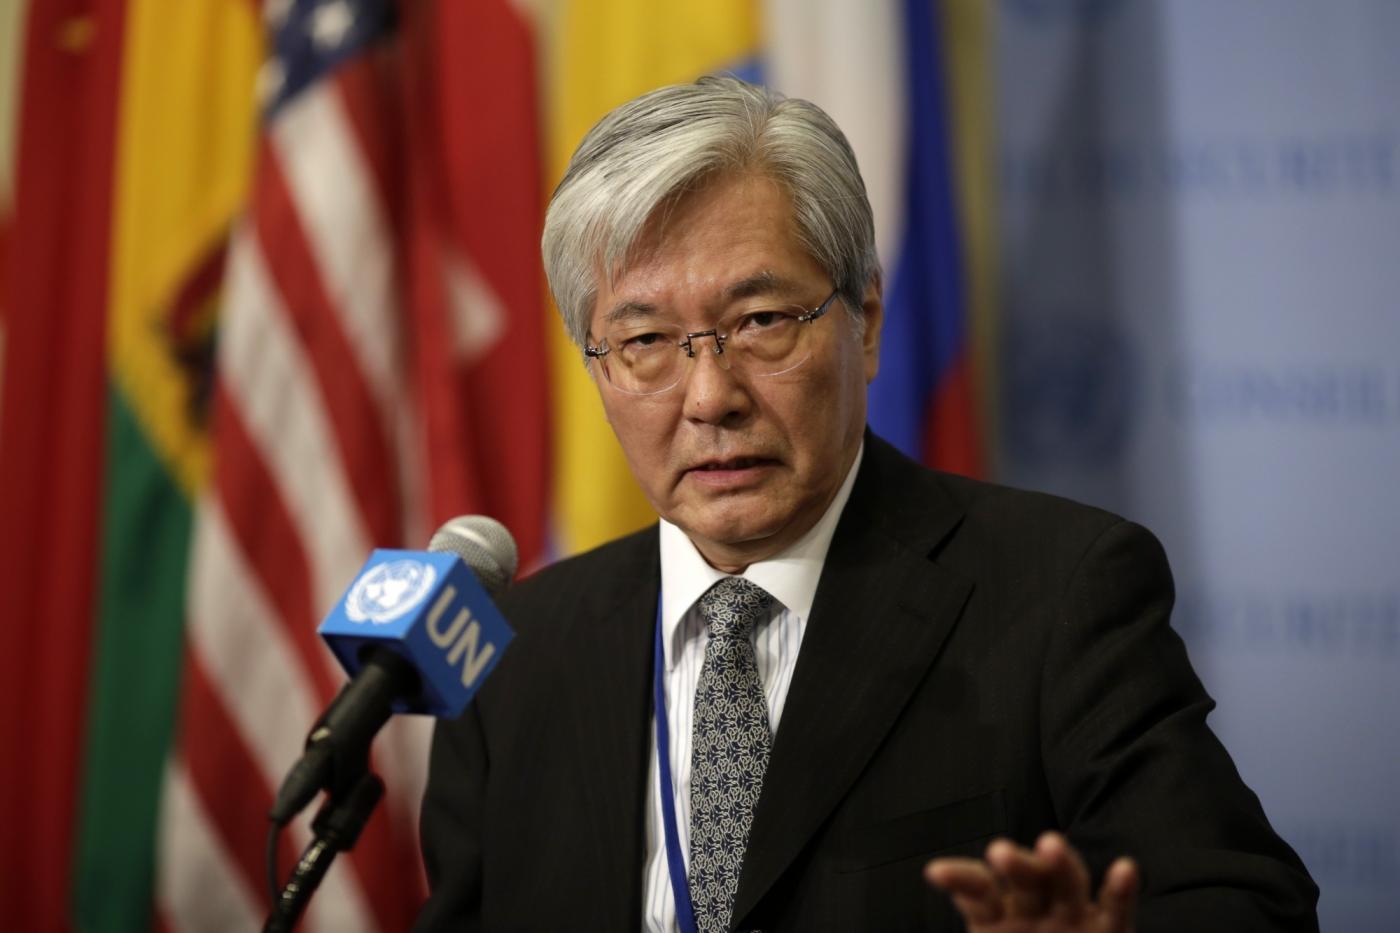 UNITED NATIONS, June 27, 2018 (Xinhua) -- Tadamichi Yamamoto, Special Representative of the United Nations Secretary-General and Head of the United Nations Assistance Mission in Afghanistan, speaks to journalists on the situation in Afghanistan, at the UN headquarters in New York, June 26, 2018. Speakers attending a UN Security Council meeting on the situation in Afghanistan said Tuesday that there were unprecedented opportunities for Afghanistan to seek peace and consolidate its political foundation. (Xinhua/Li Muzi/IANS) by .